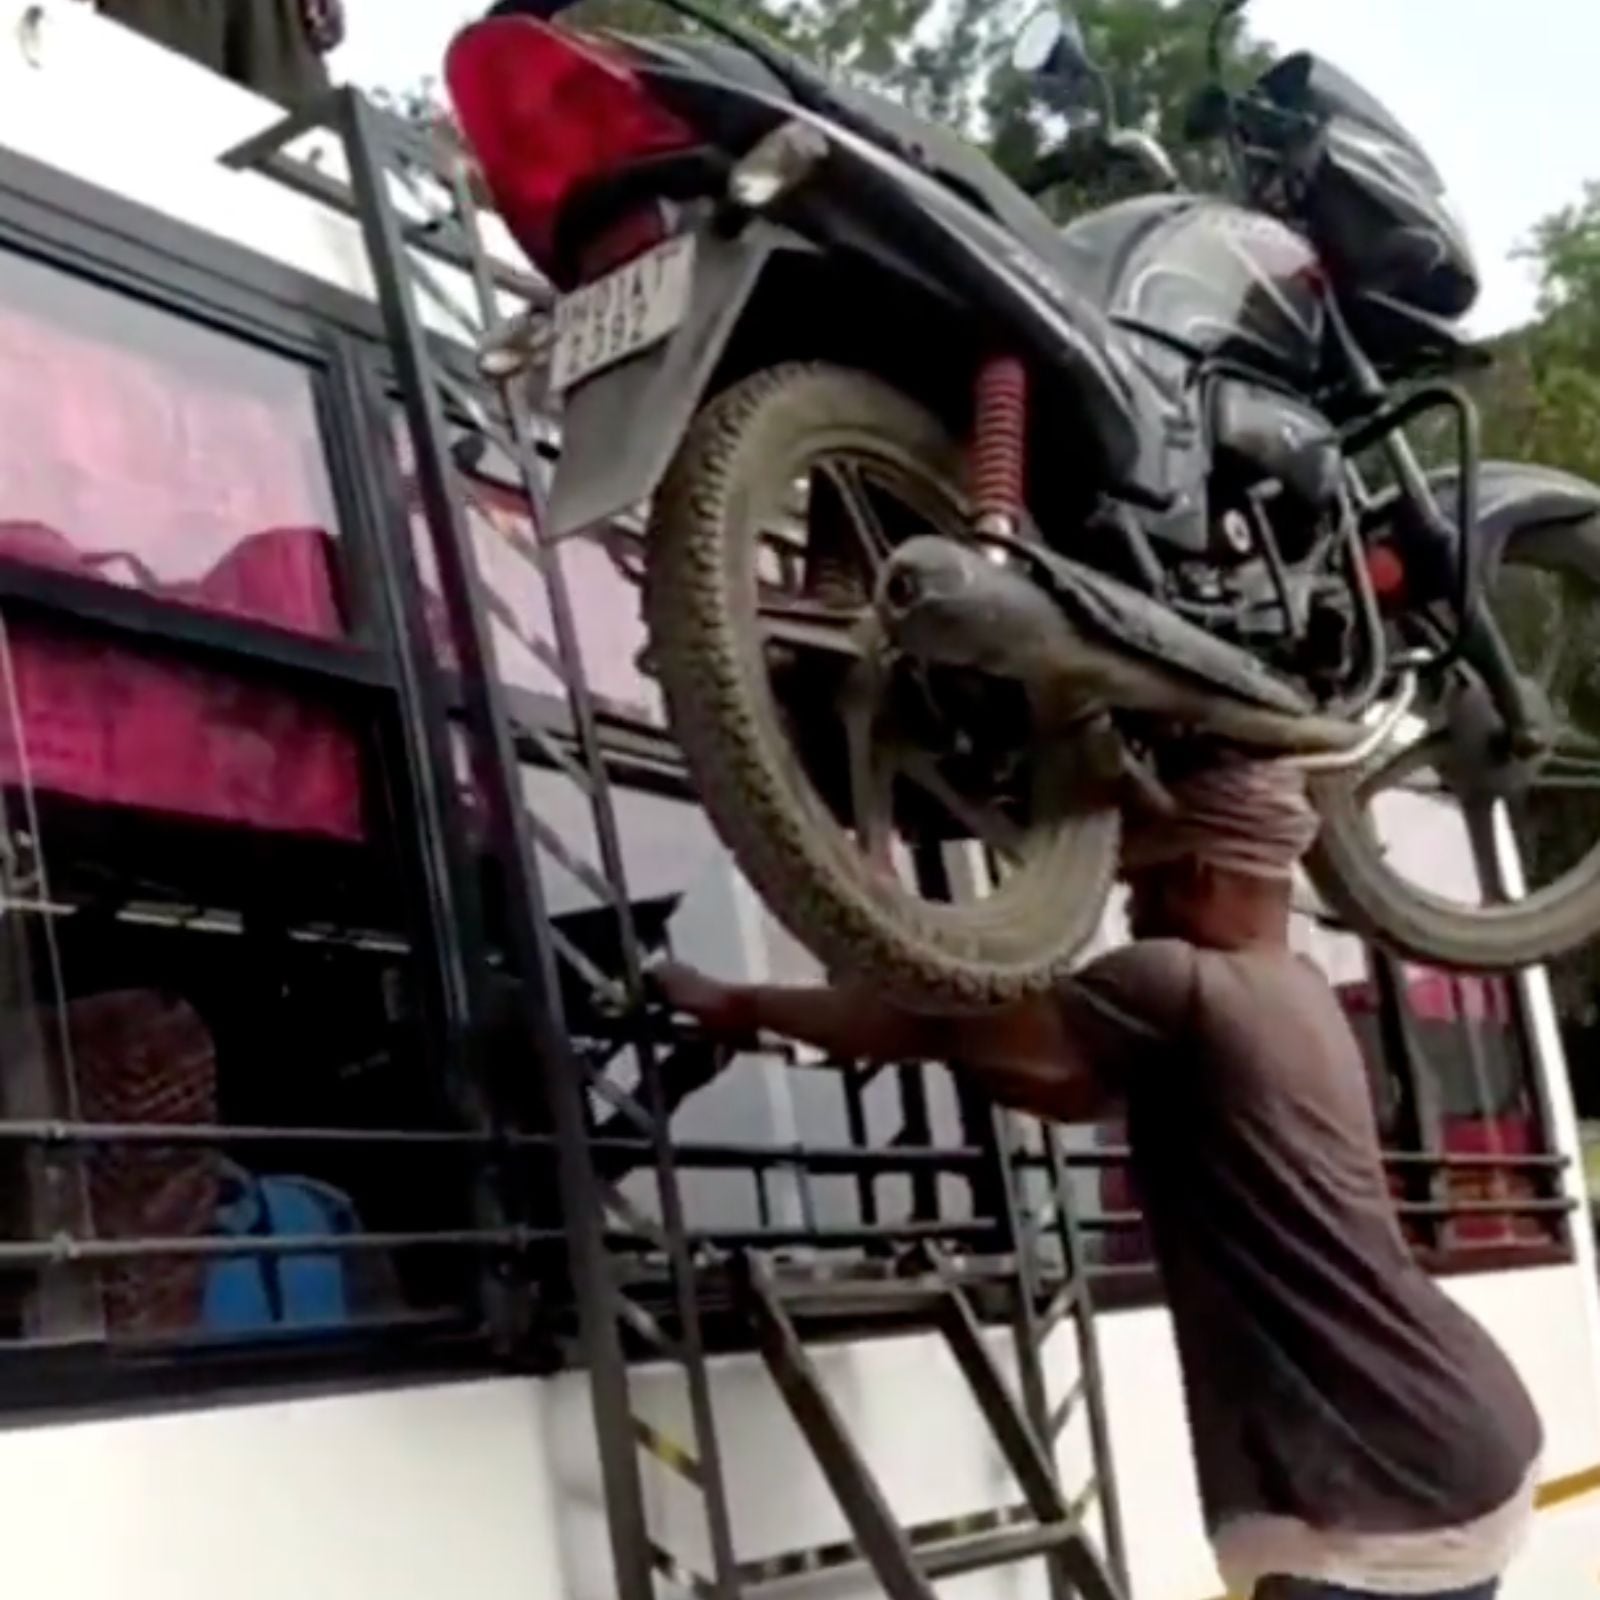 man climbs bike on his head in bus ladder video amazed people